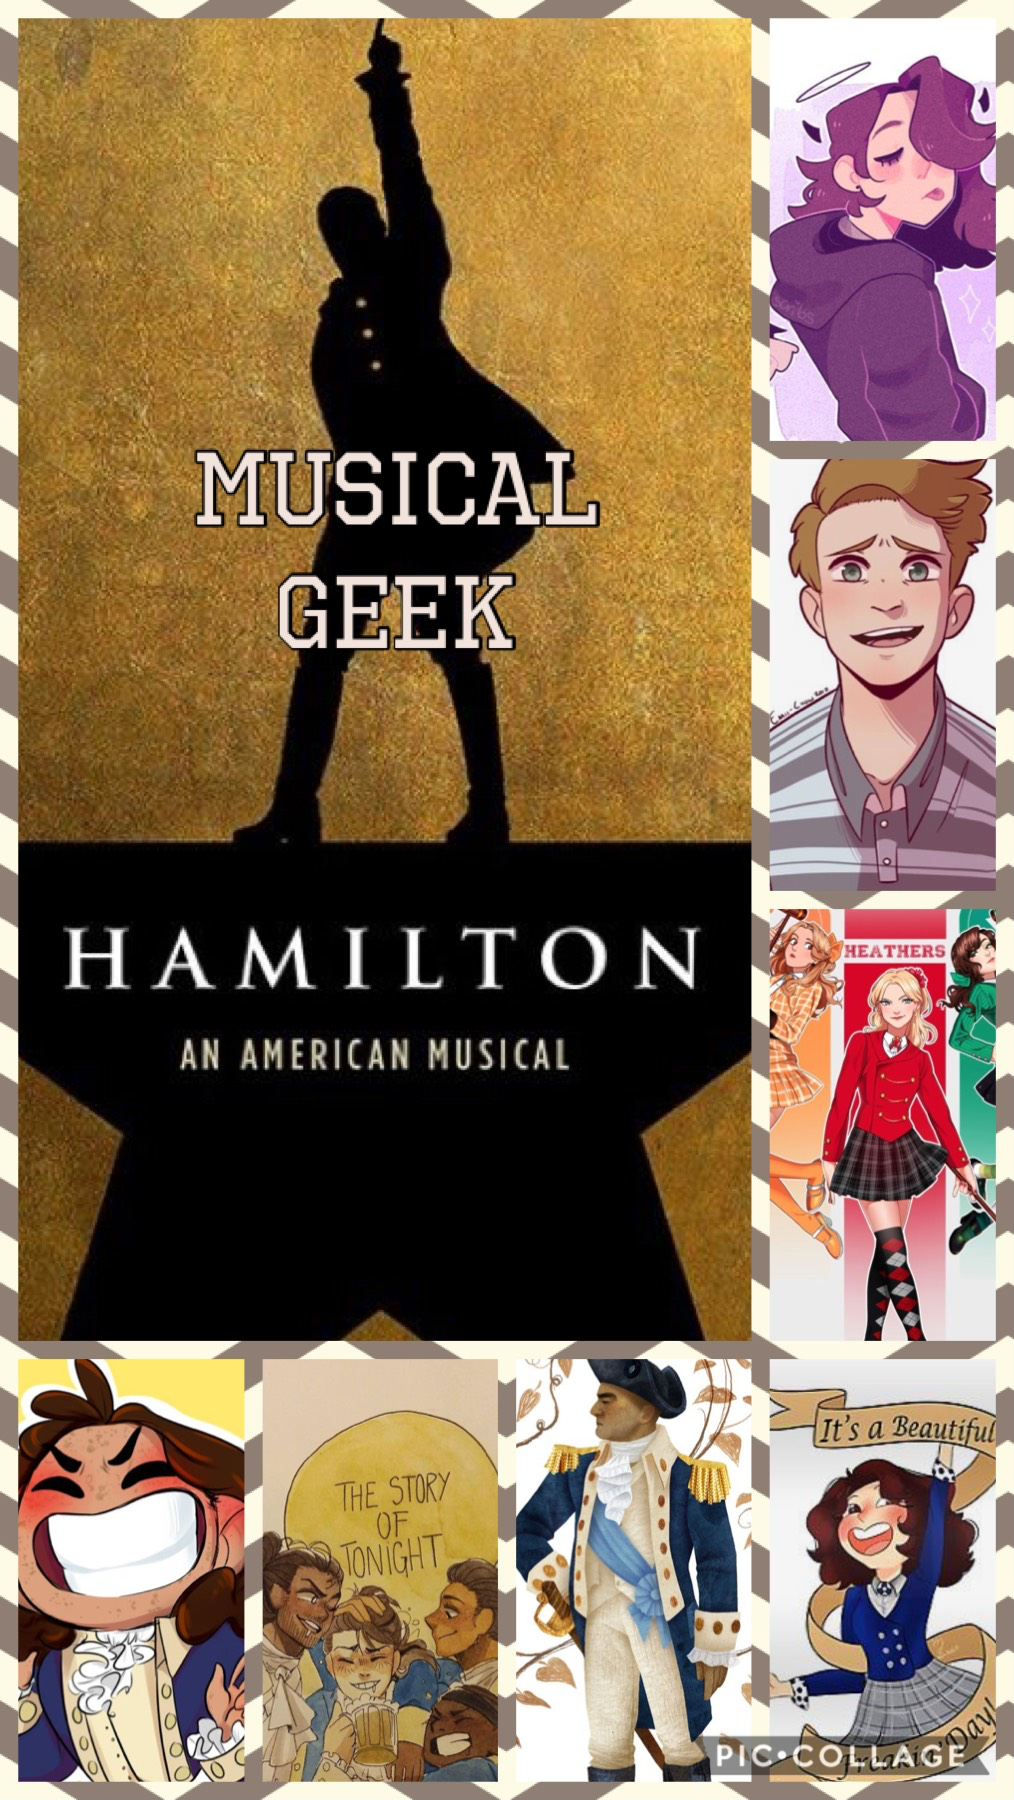    Name them all go!
Hamilton, Dear Evan Hansen and Heathers. There are A LOT more that I forgot! 